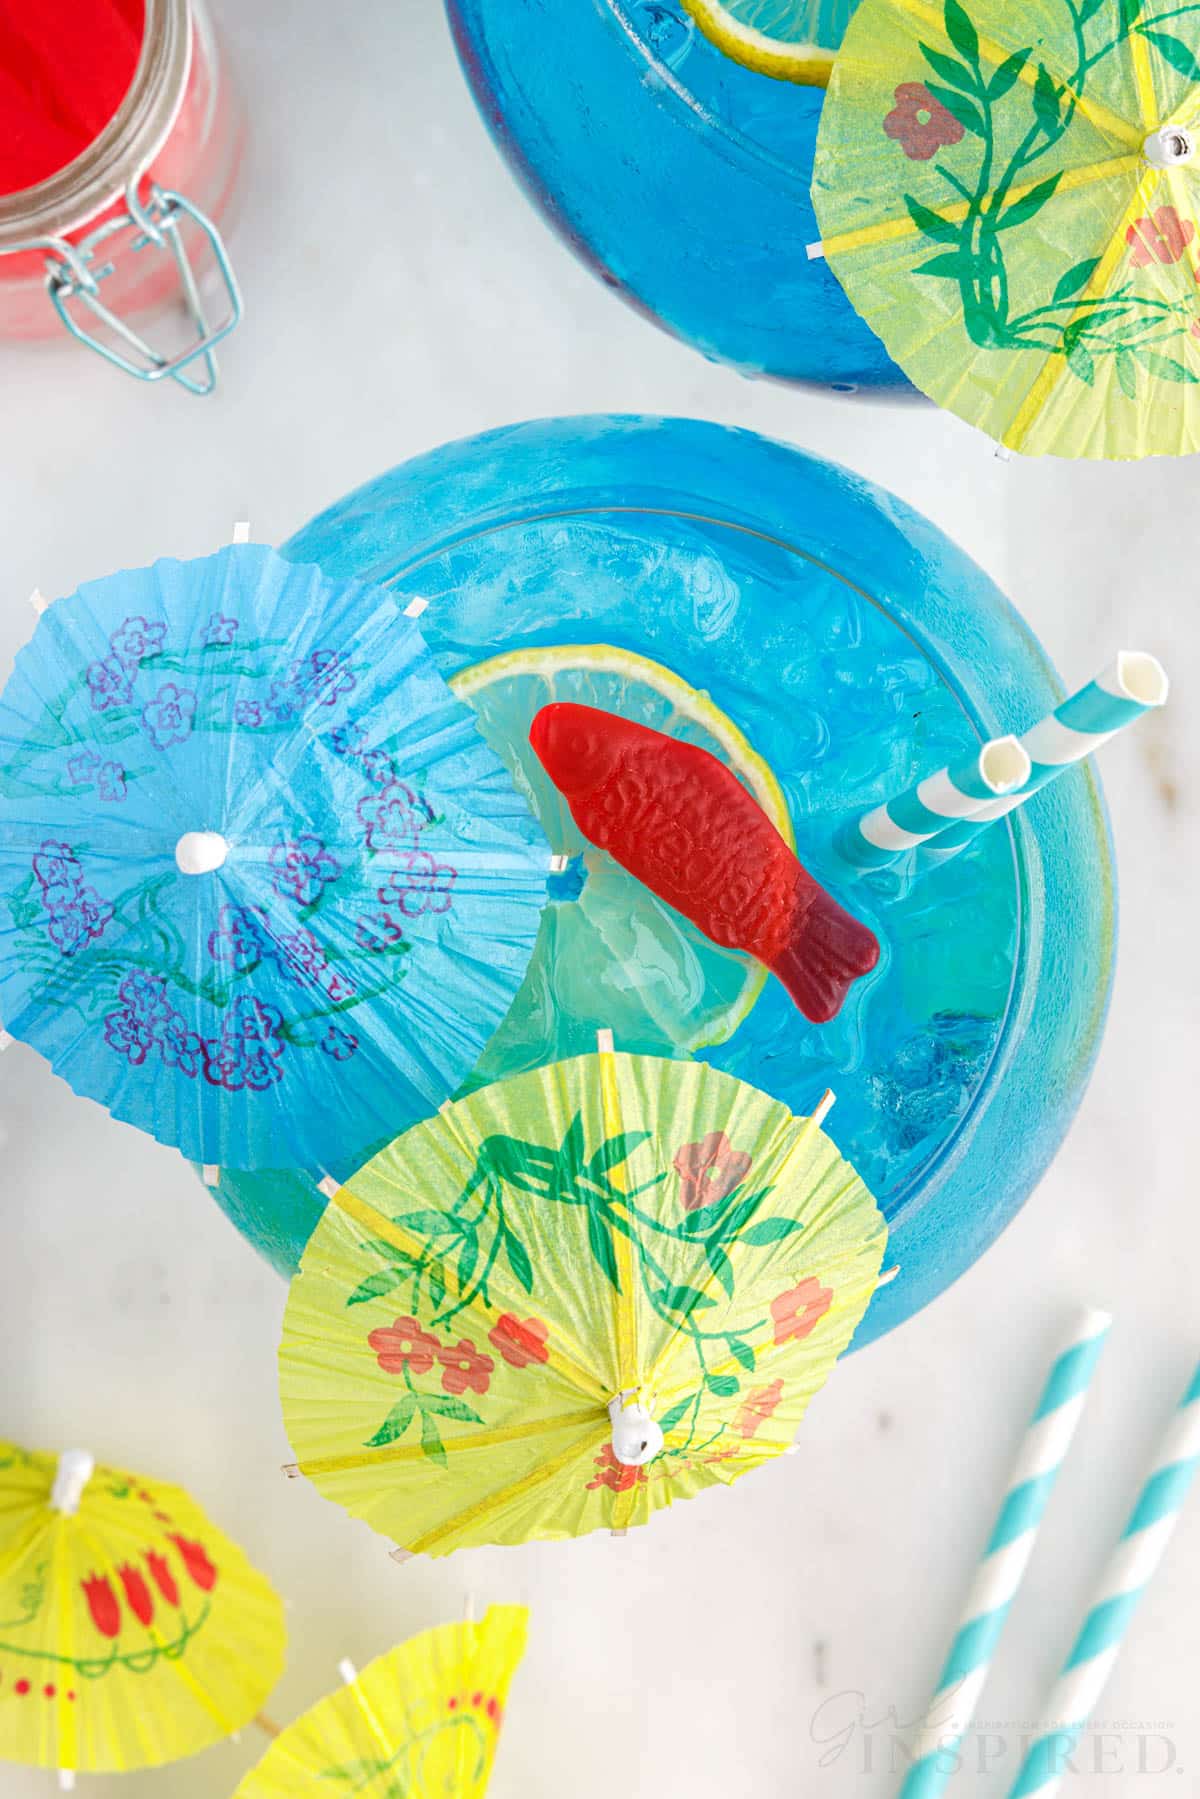 Overhead view of a Fish Bowl Drink with umbrellas and Swedish fish.